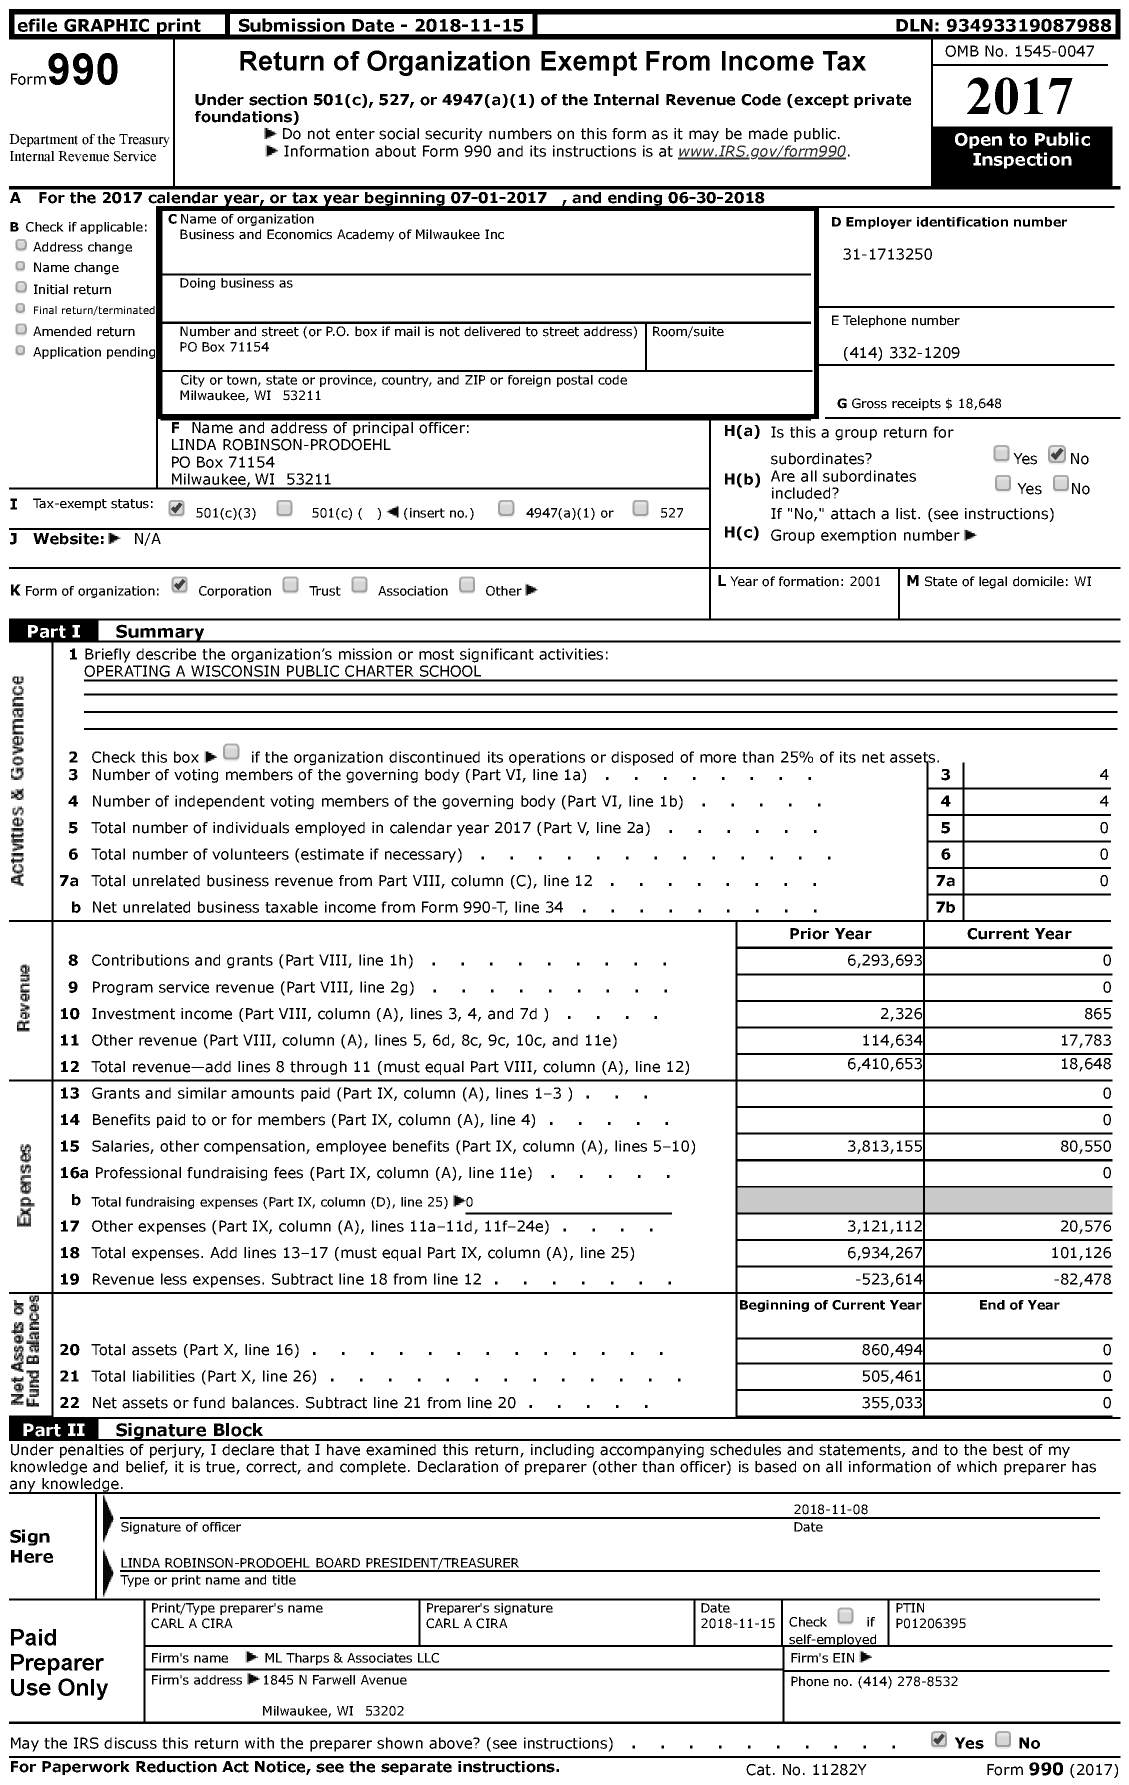 Image of first page of 2017 Form 990 for Business and Economics Academy of Milwaukee (BEAM)